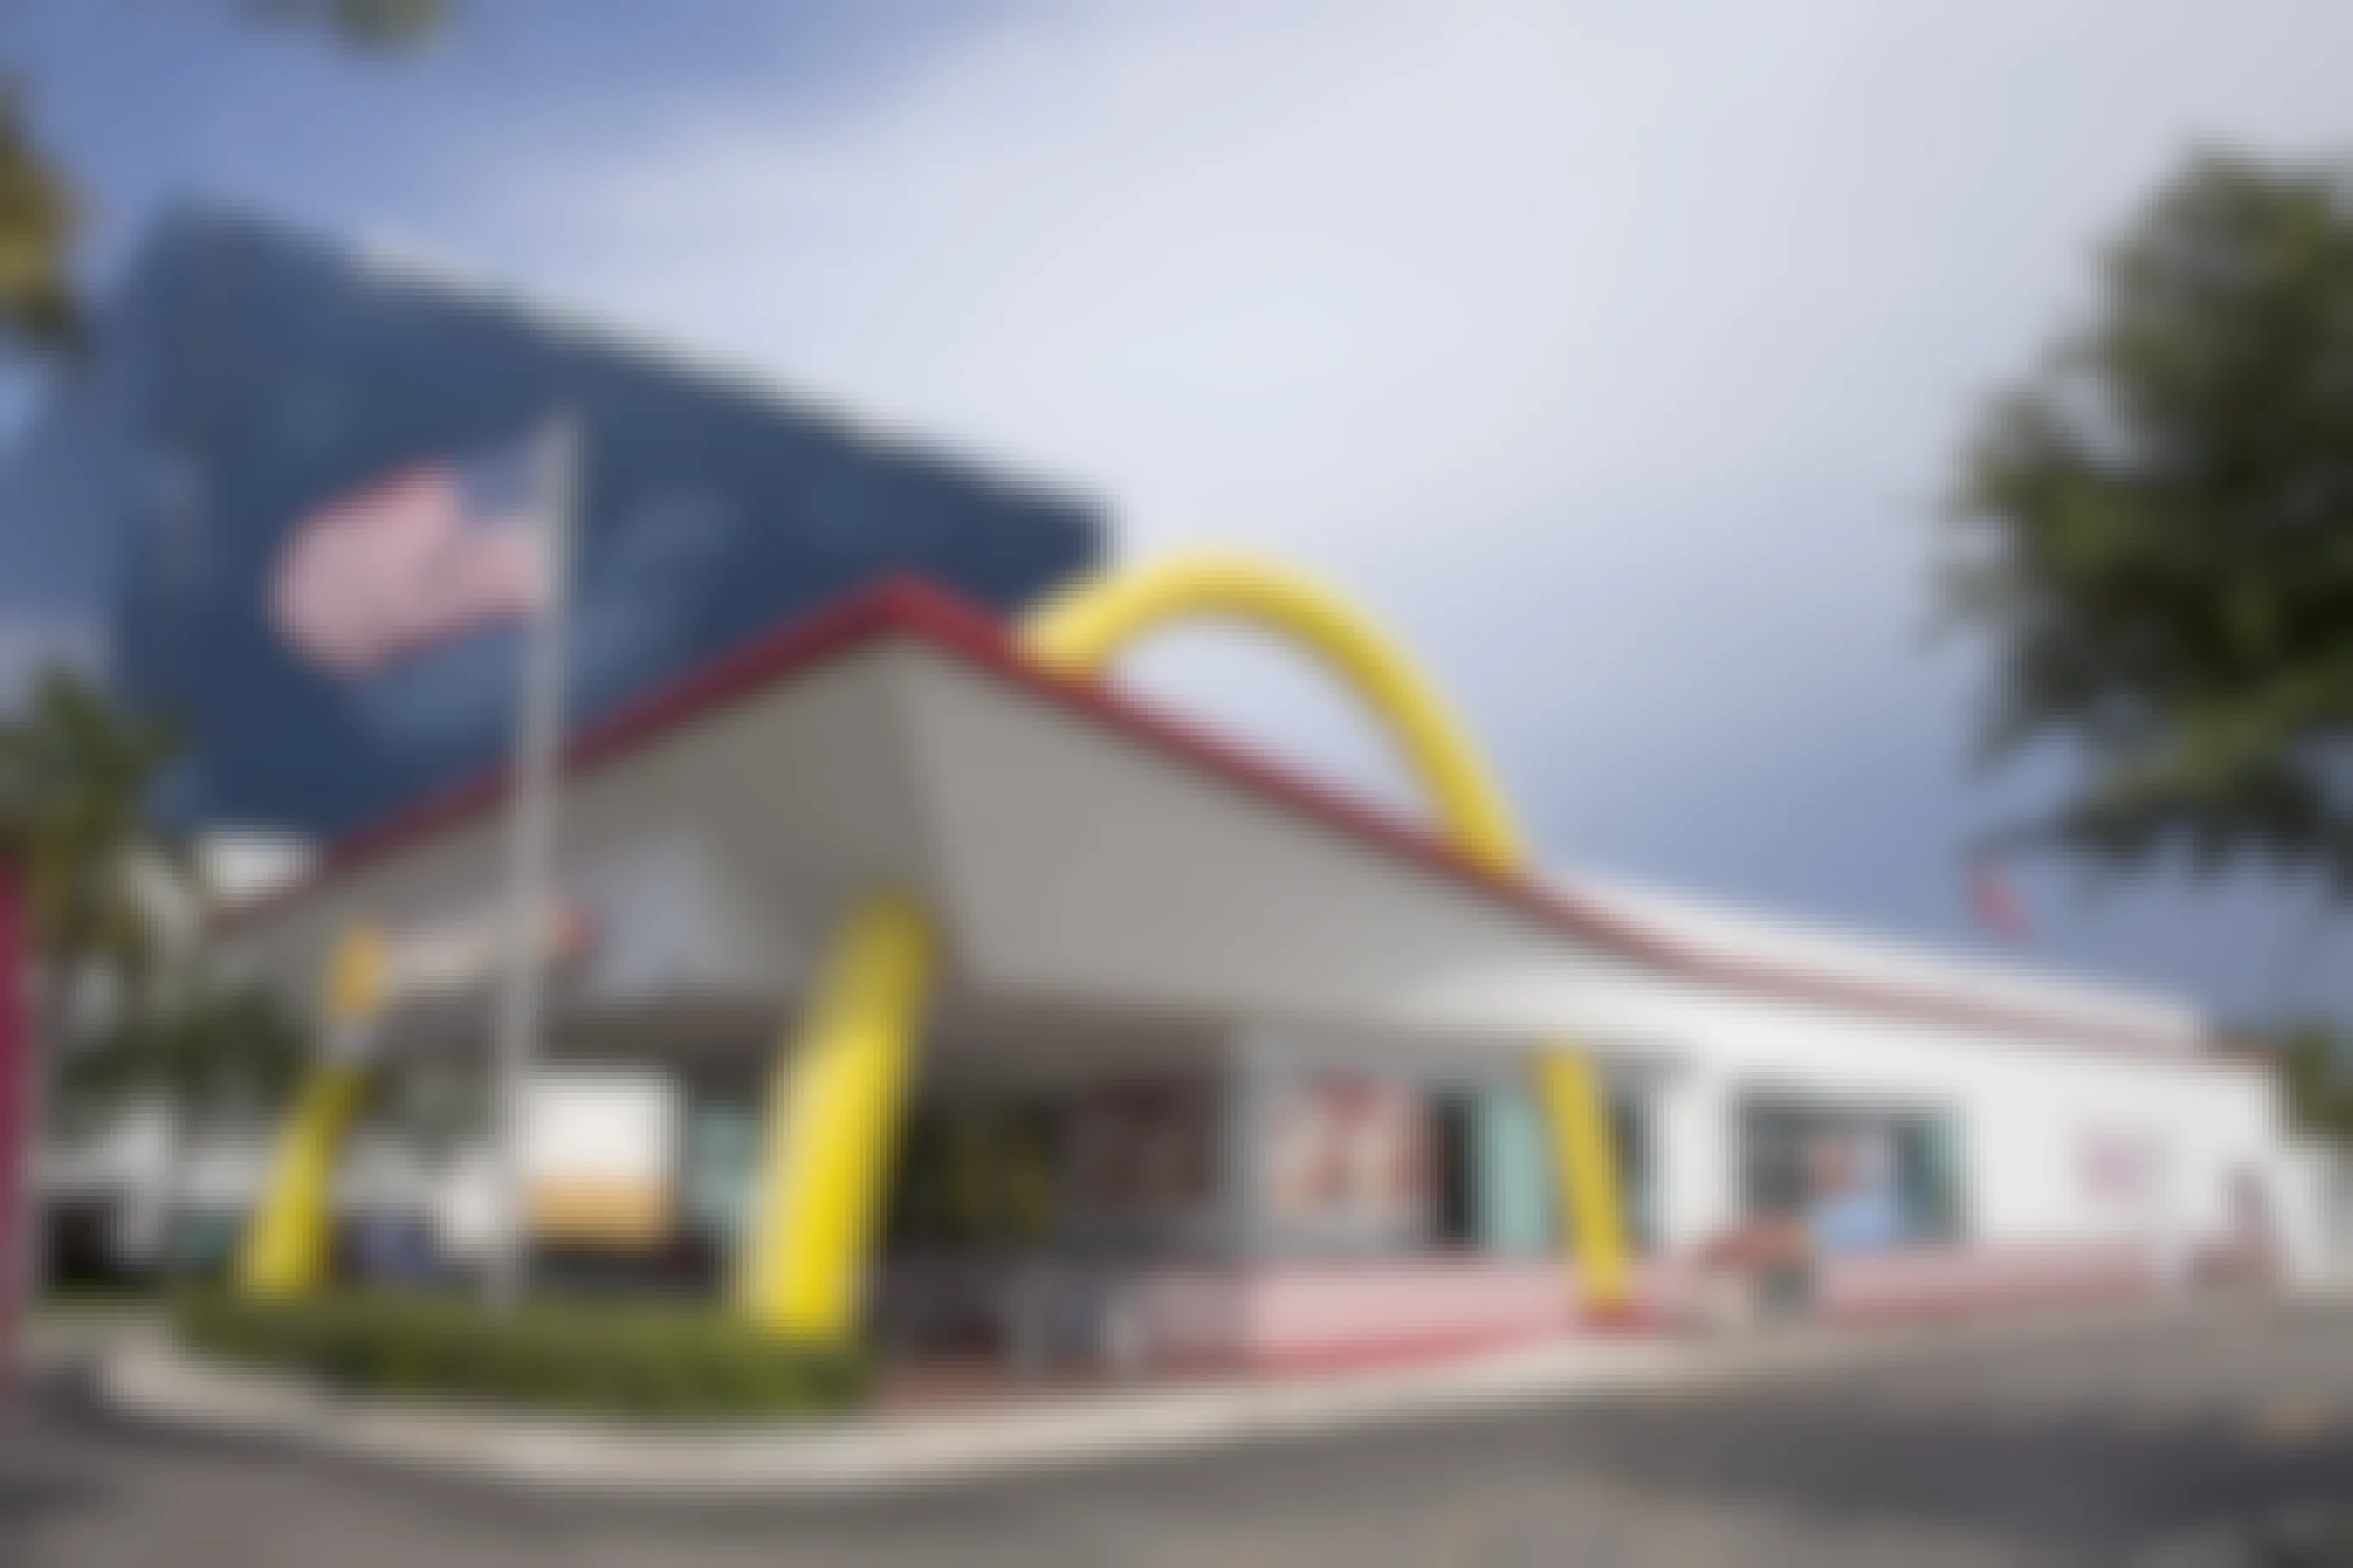 Exterior view of a McDonald's restaurant with an American flag out front.